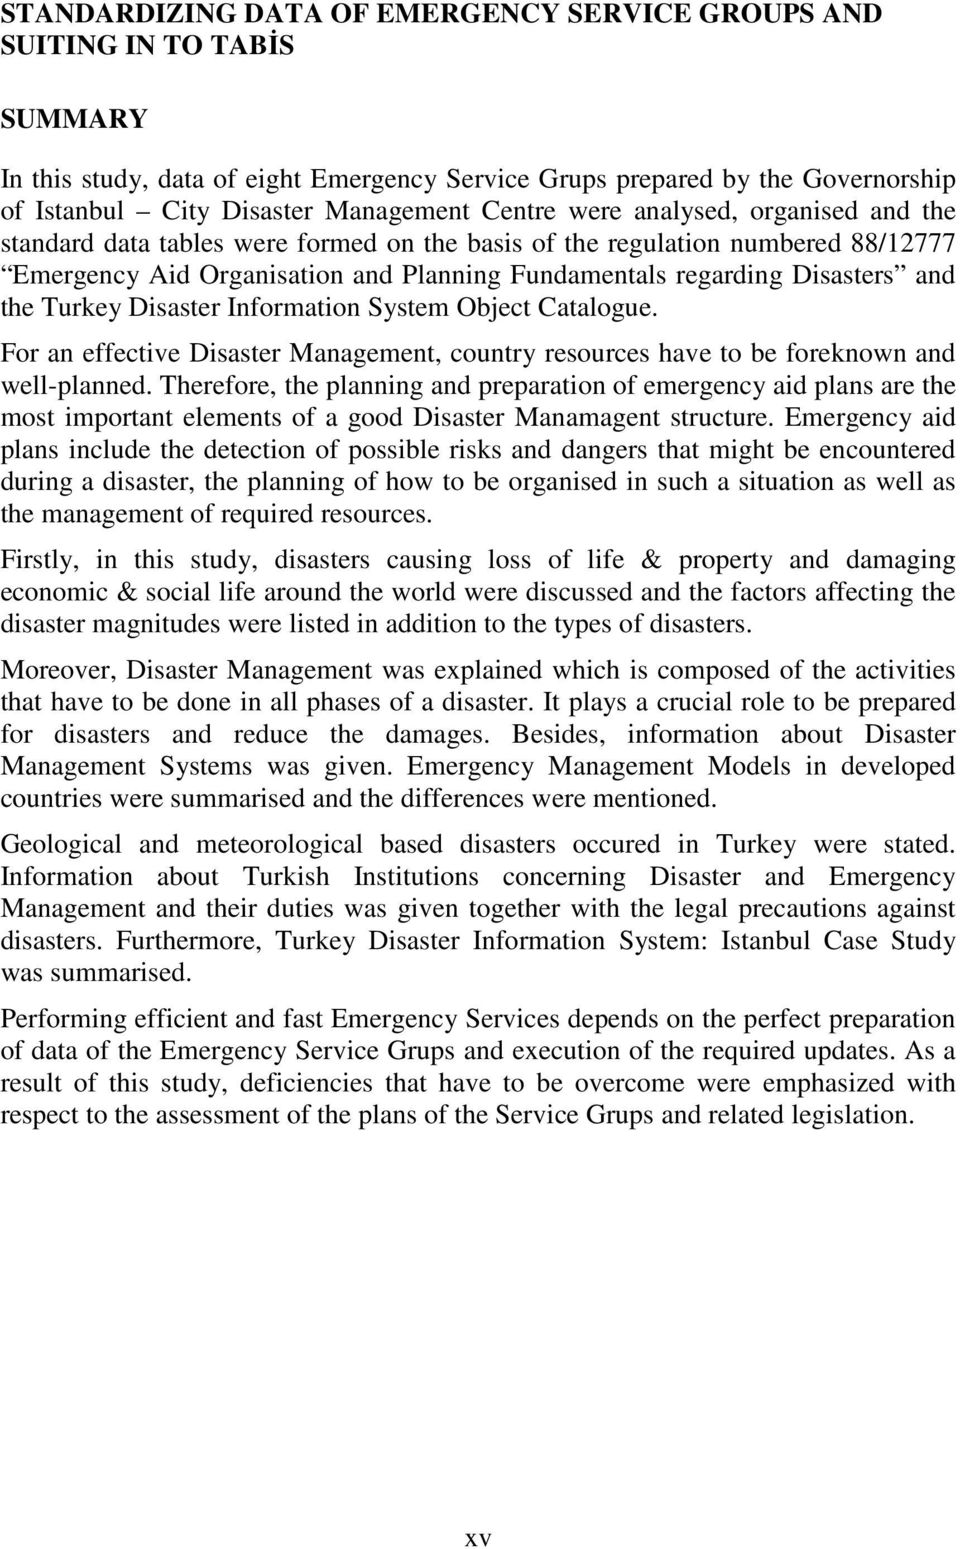 the Turkey Disaster Information System Object Catalogue. For an effective Disaster Management, country resources have to be foreknown and well-planned.